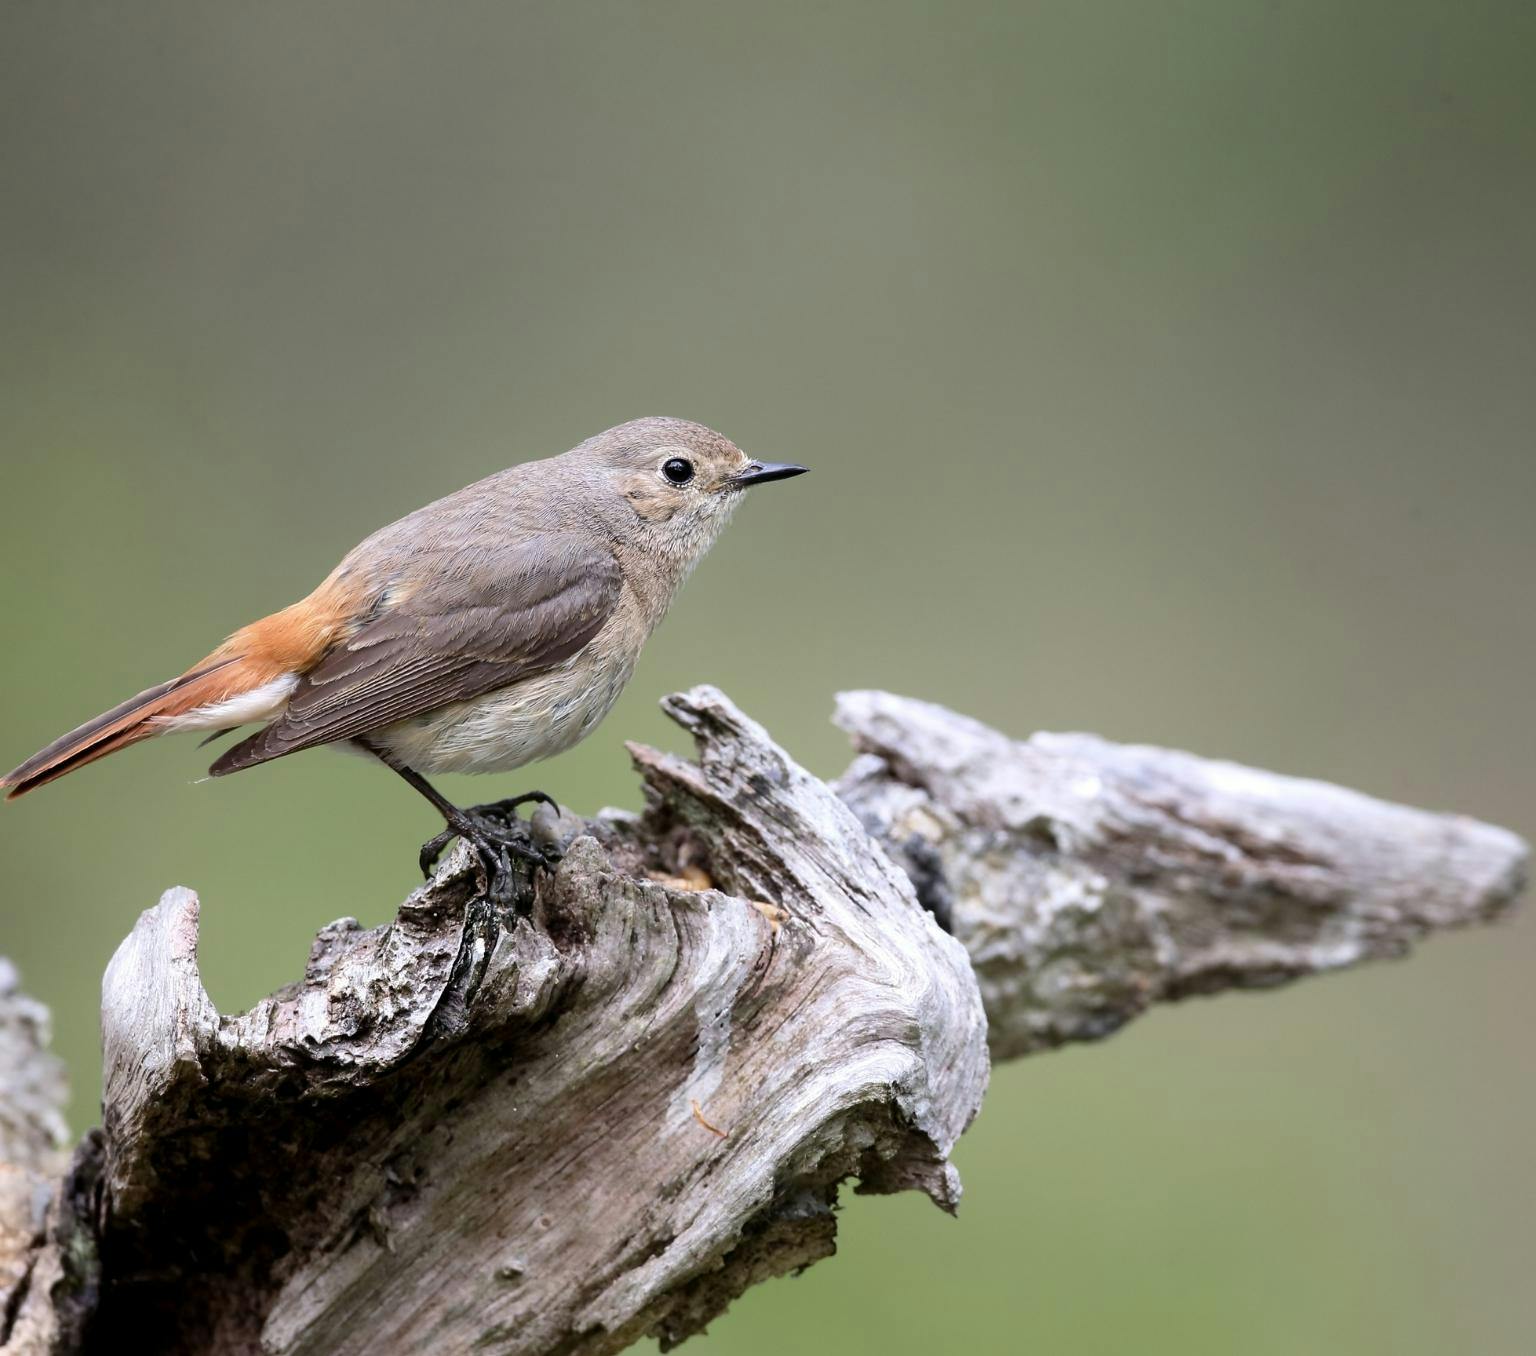 A common female redstart bird perched on a tree branch. It has a bright orange tail and a brown coloured body.